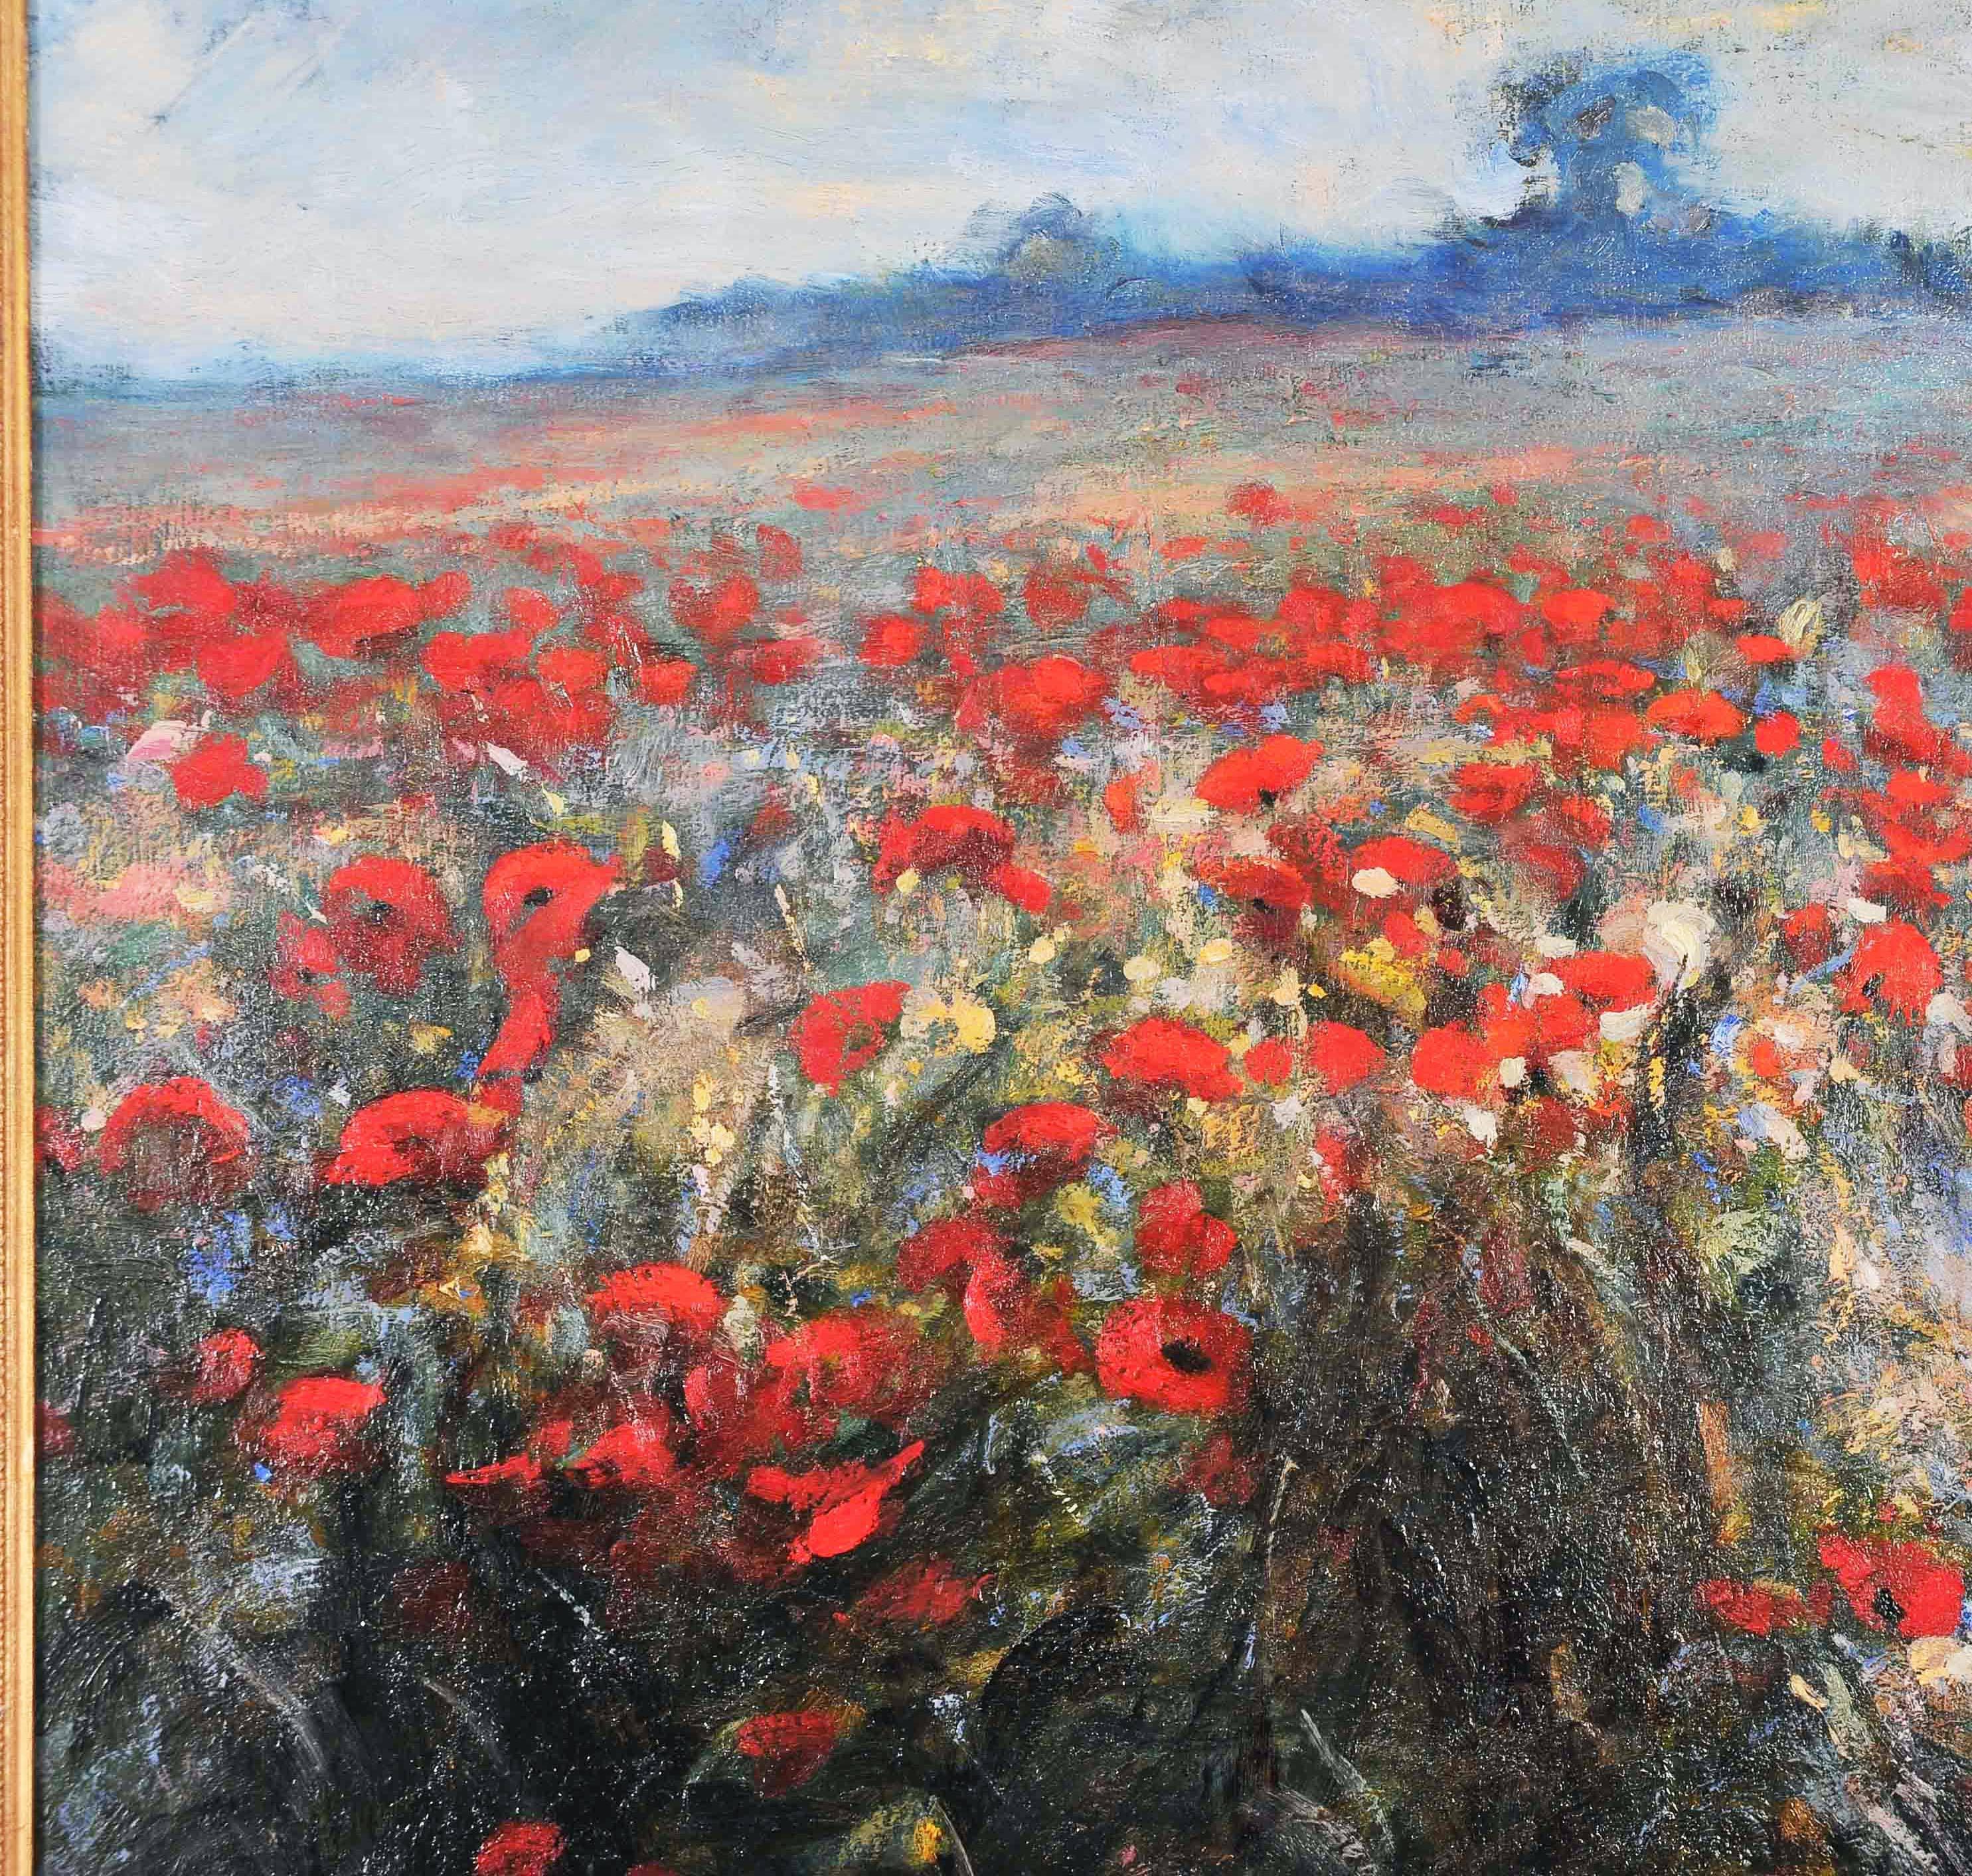 This beautiful and vivid oil on canvas painting is titled ‘Poppies’ and was painted by Jan Wanat, a contemporary Polish artist. The painting depicts a vast swath of brightly colored poppies against a pale blue landscape, set in a decorative gilt